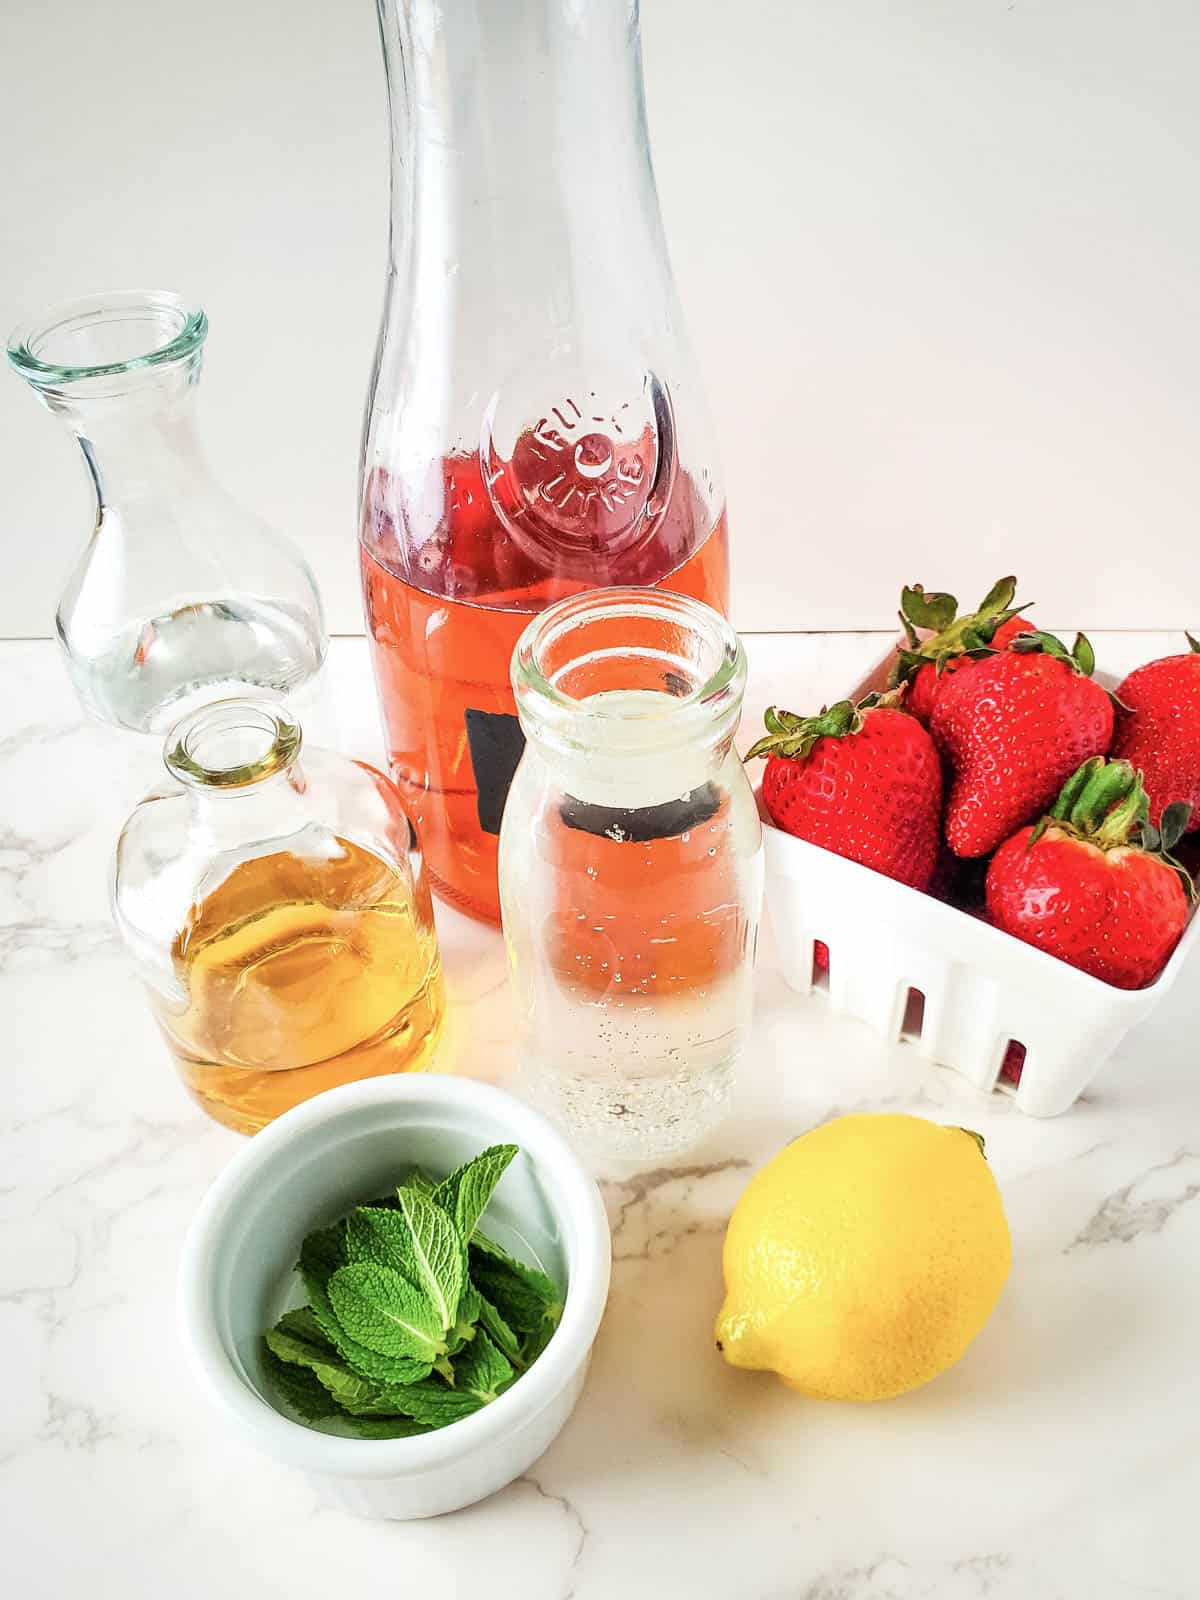 Strawberry wine sangria ingredients on a white countertop.